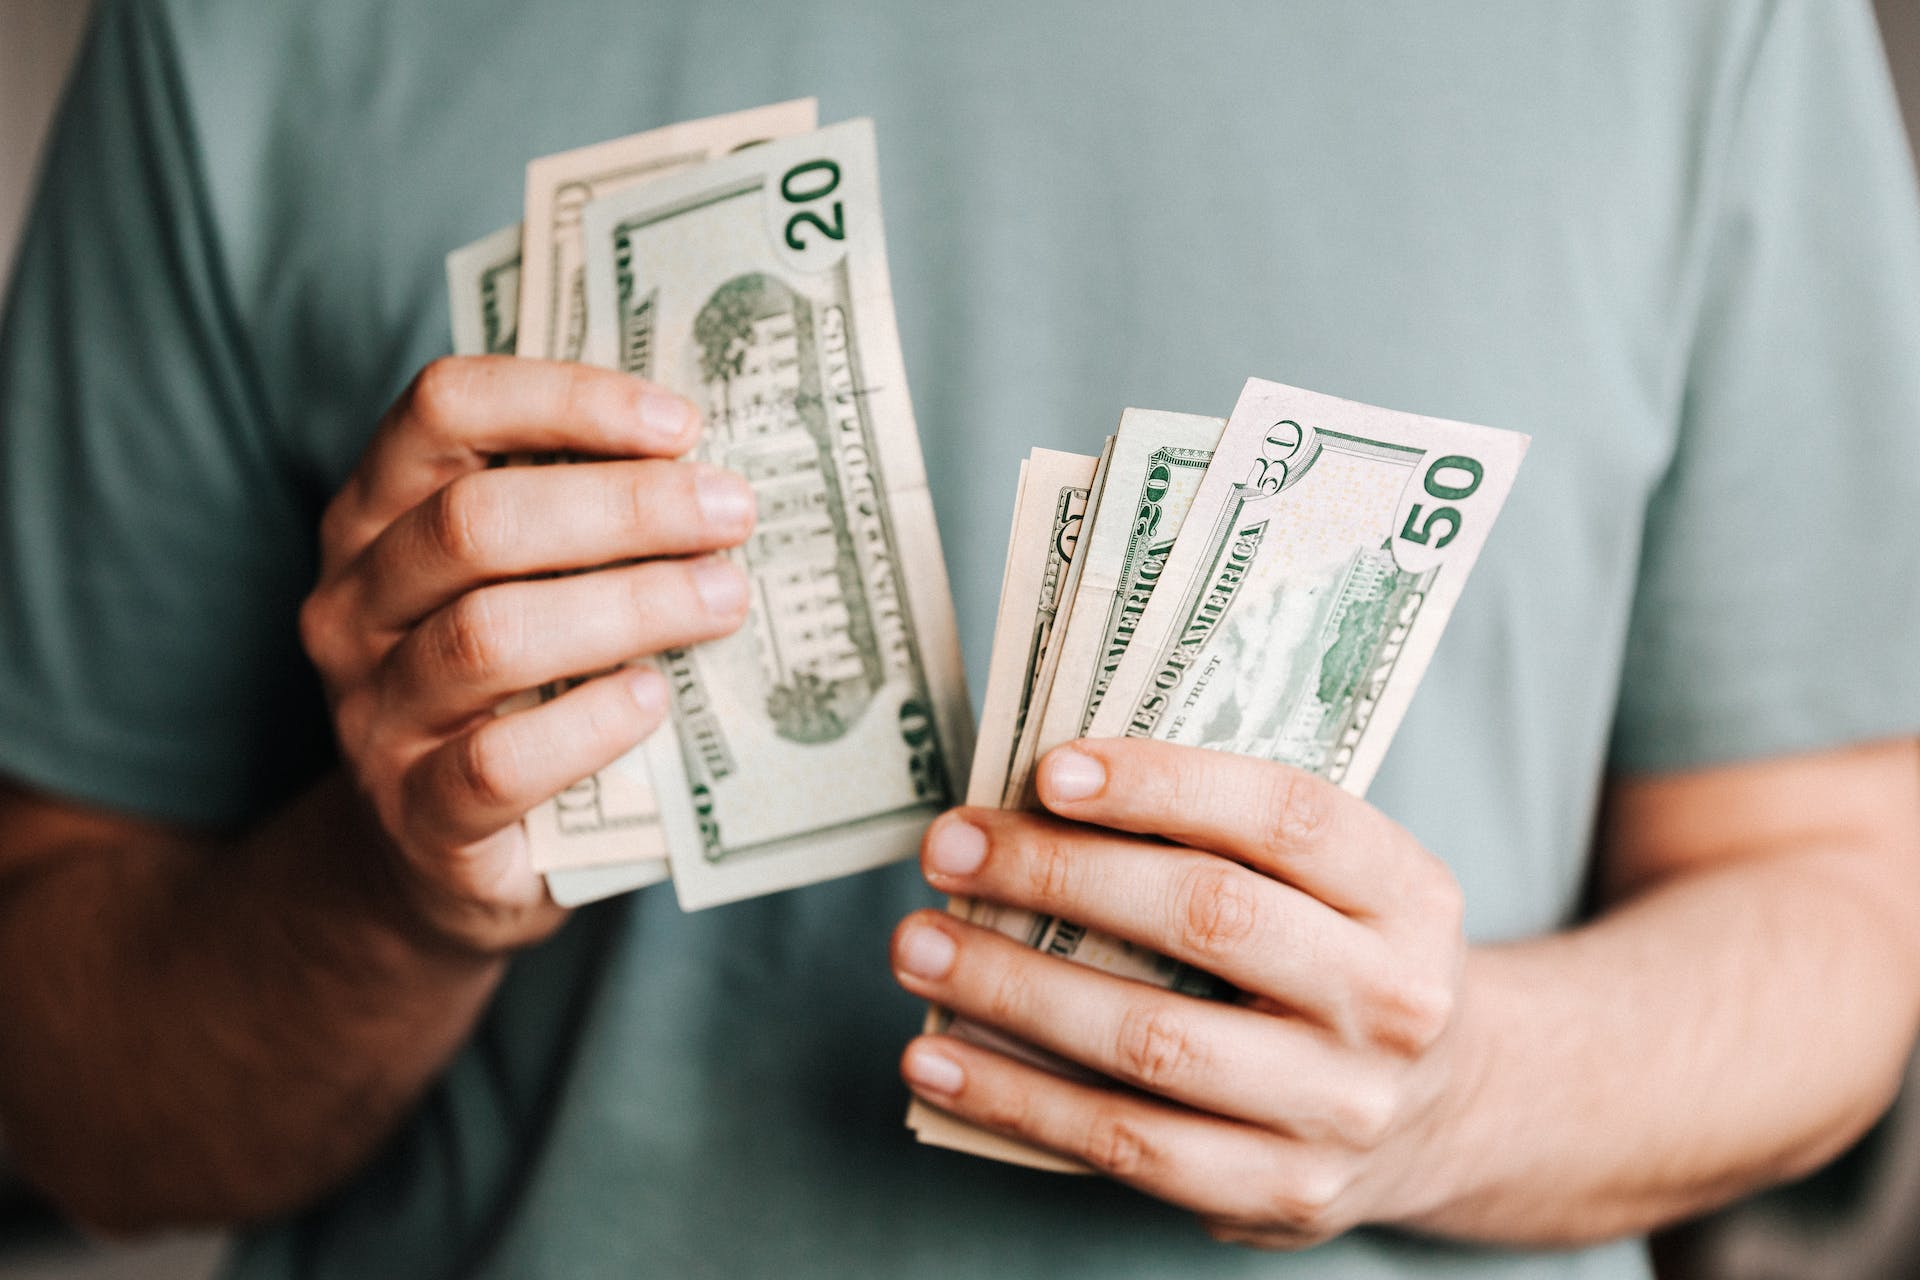 A man counting money | Source: Pexels